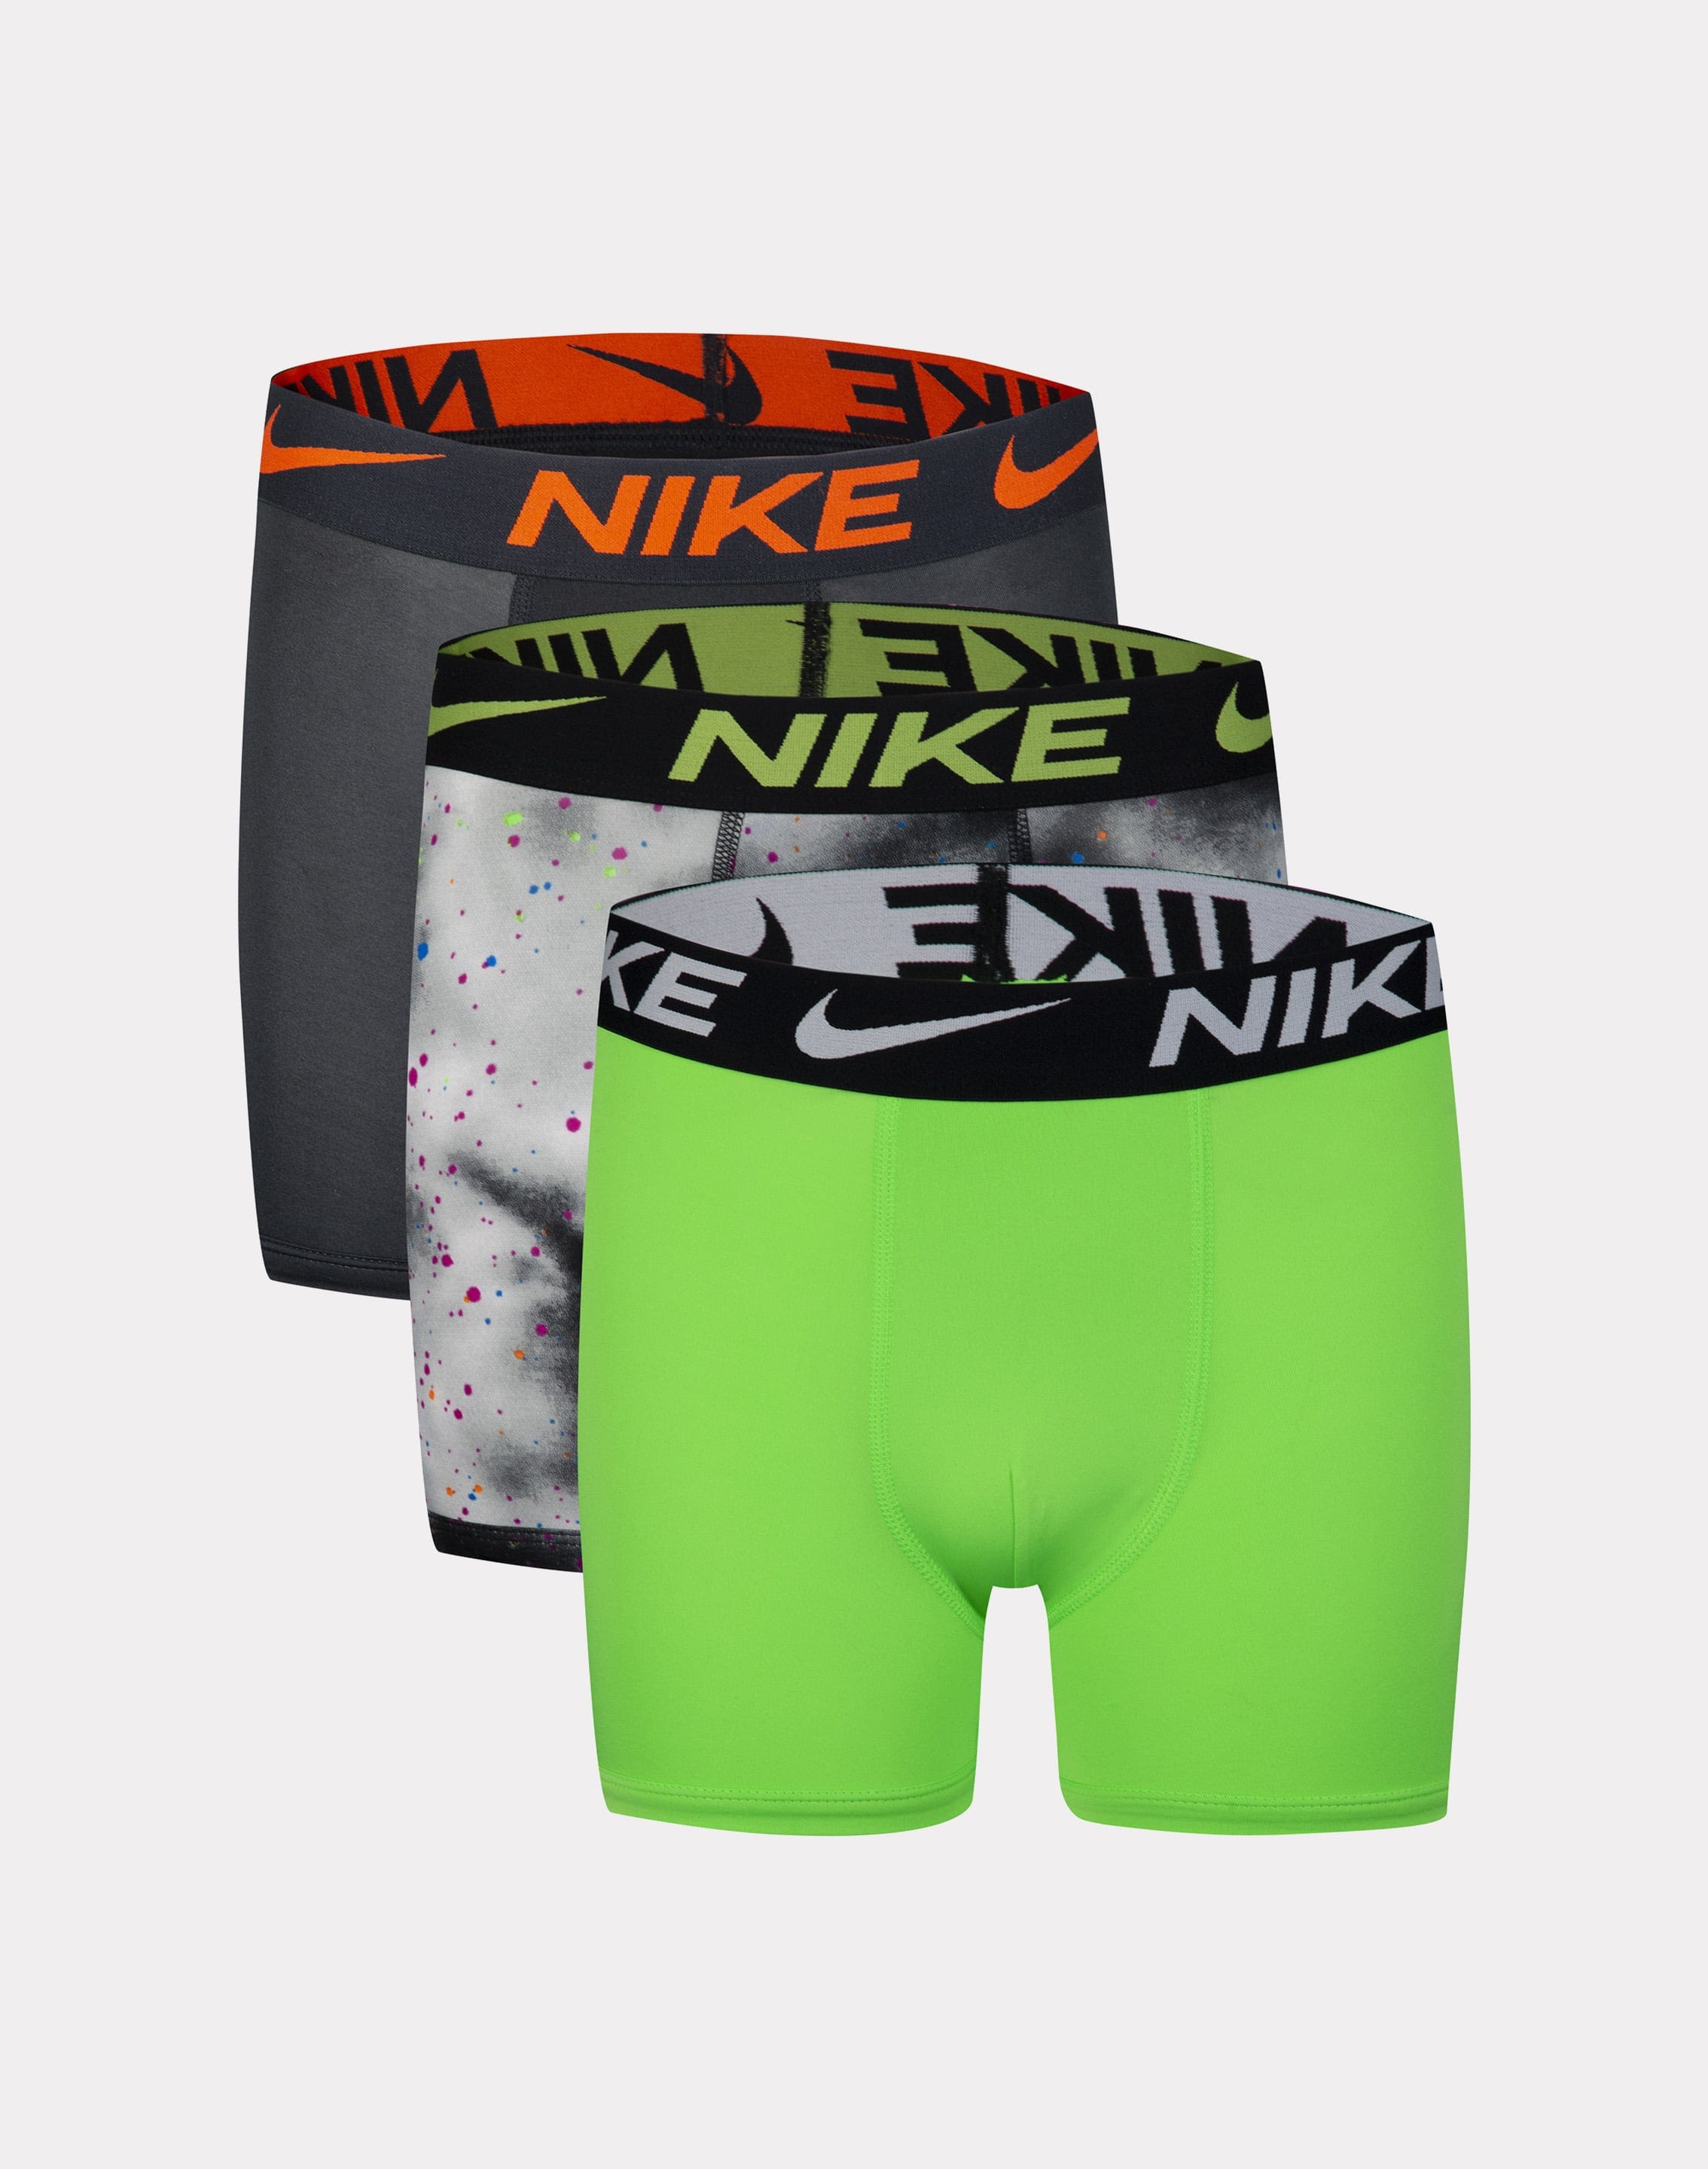 Nike Essential Micro Boxer Briefs – DTLR